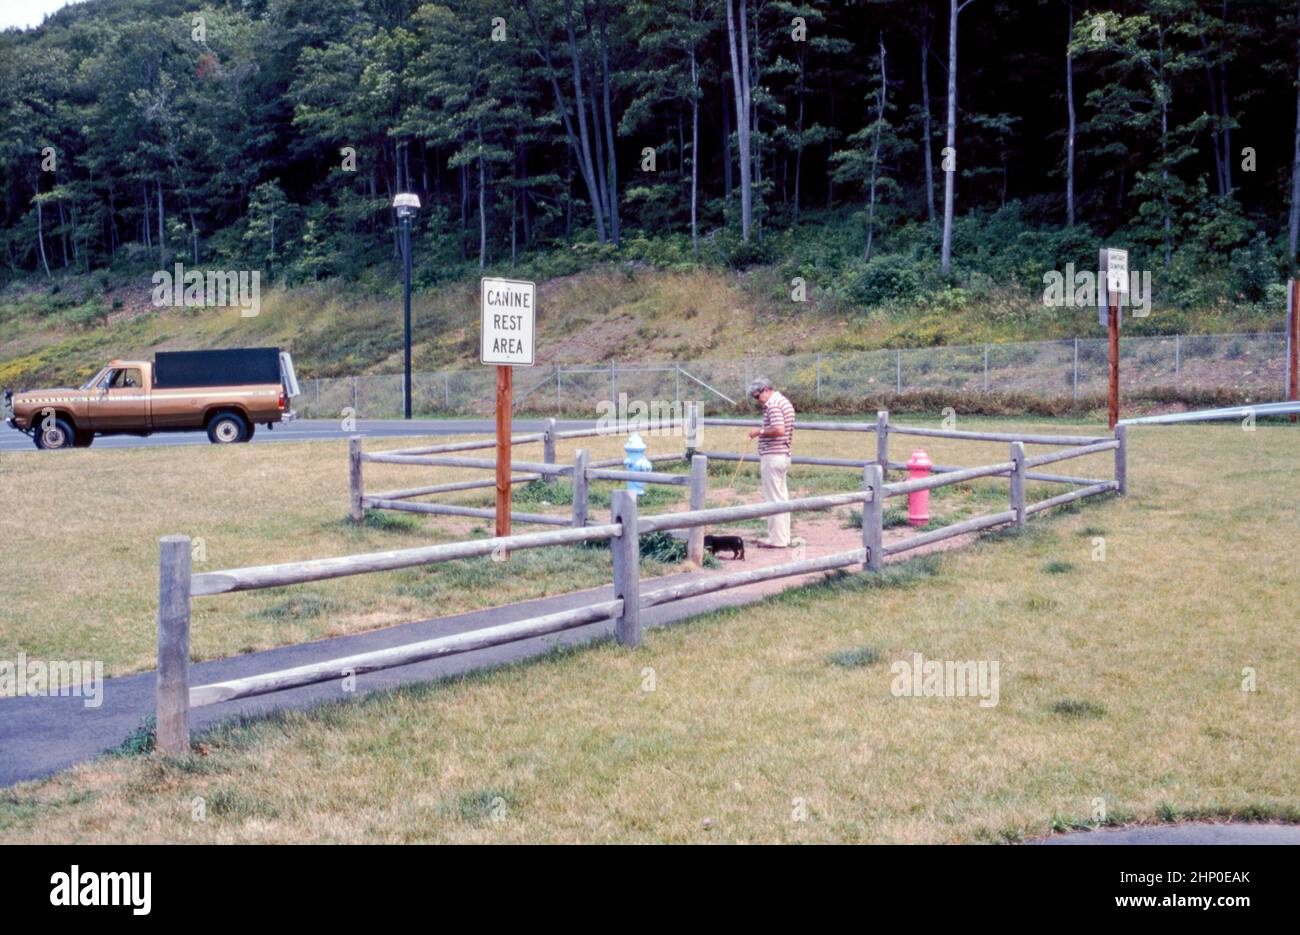 A roadside ‘Canine Rest Area’ in Connecticut, USA in 1980 – a man has his dog on a lead inside the fenced-off area. The area is far too small to be used for exercising animals. The brightly coloured old fire hydrants are a clue as to its purpose – a doggy toilet! This image is from an old American amateur colour transparency – a vintage 1980s photograph. Stock Photo